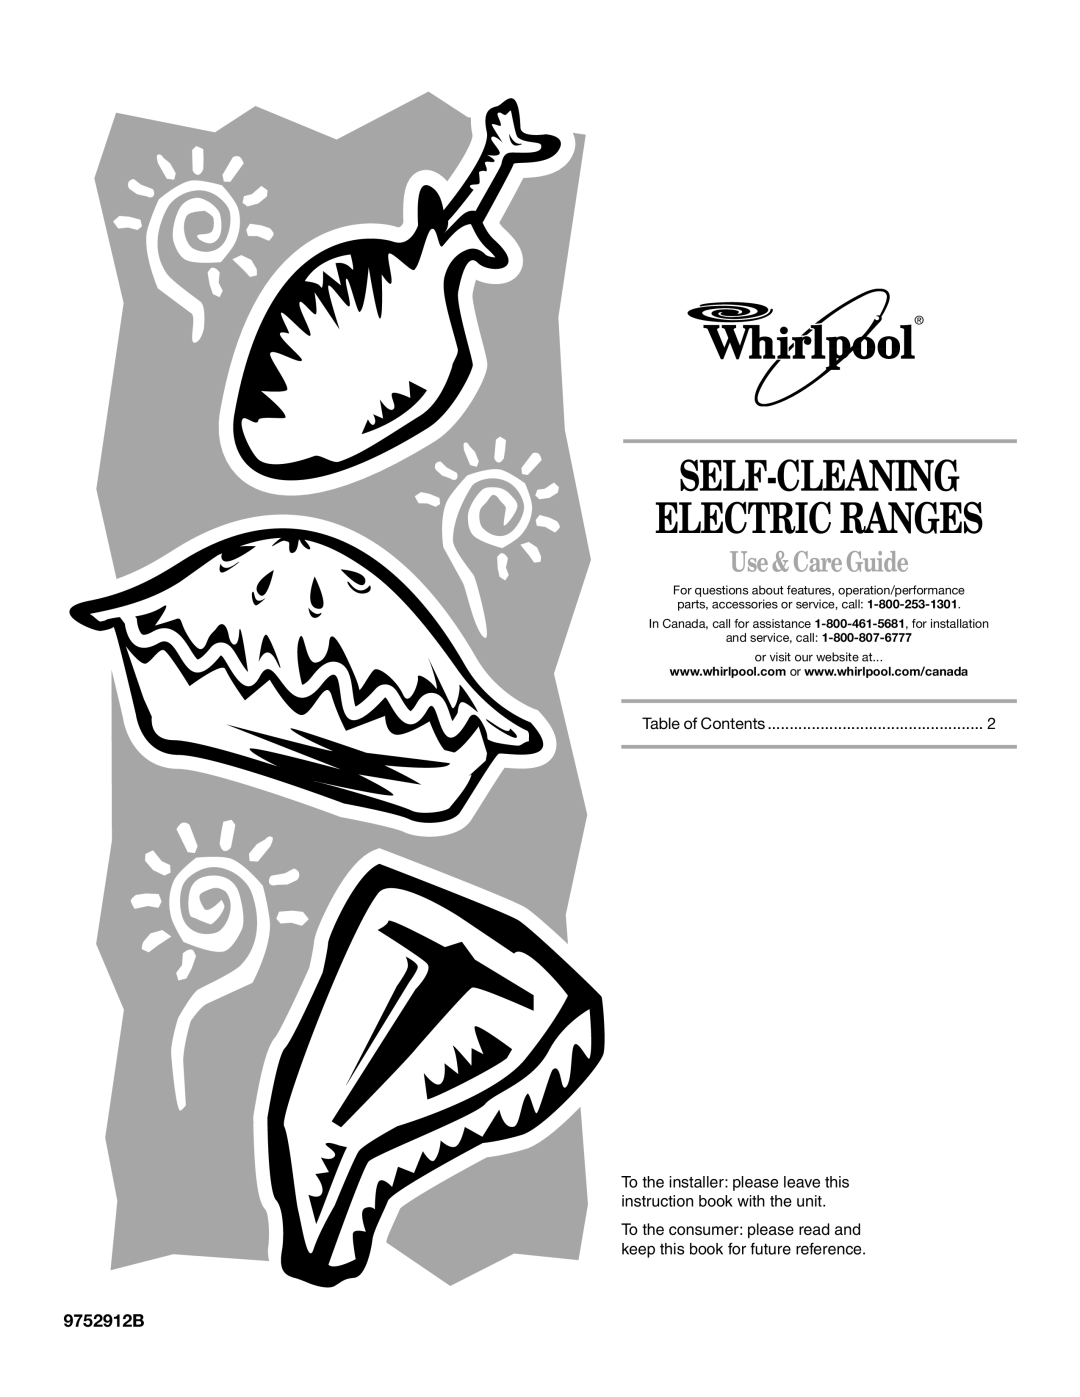 Whirlpool GY395LXGB0 manual Self-Cleaning Electric Ranges, Use & Care Guide, 9752912B 